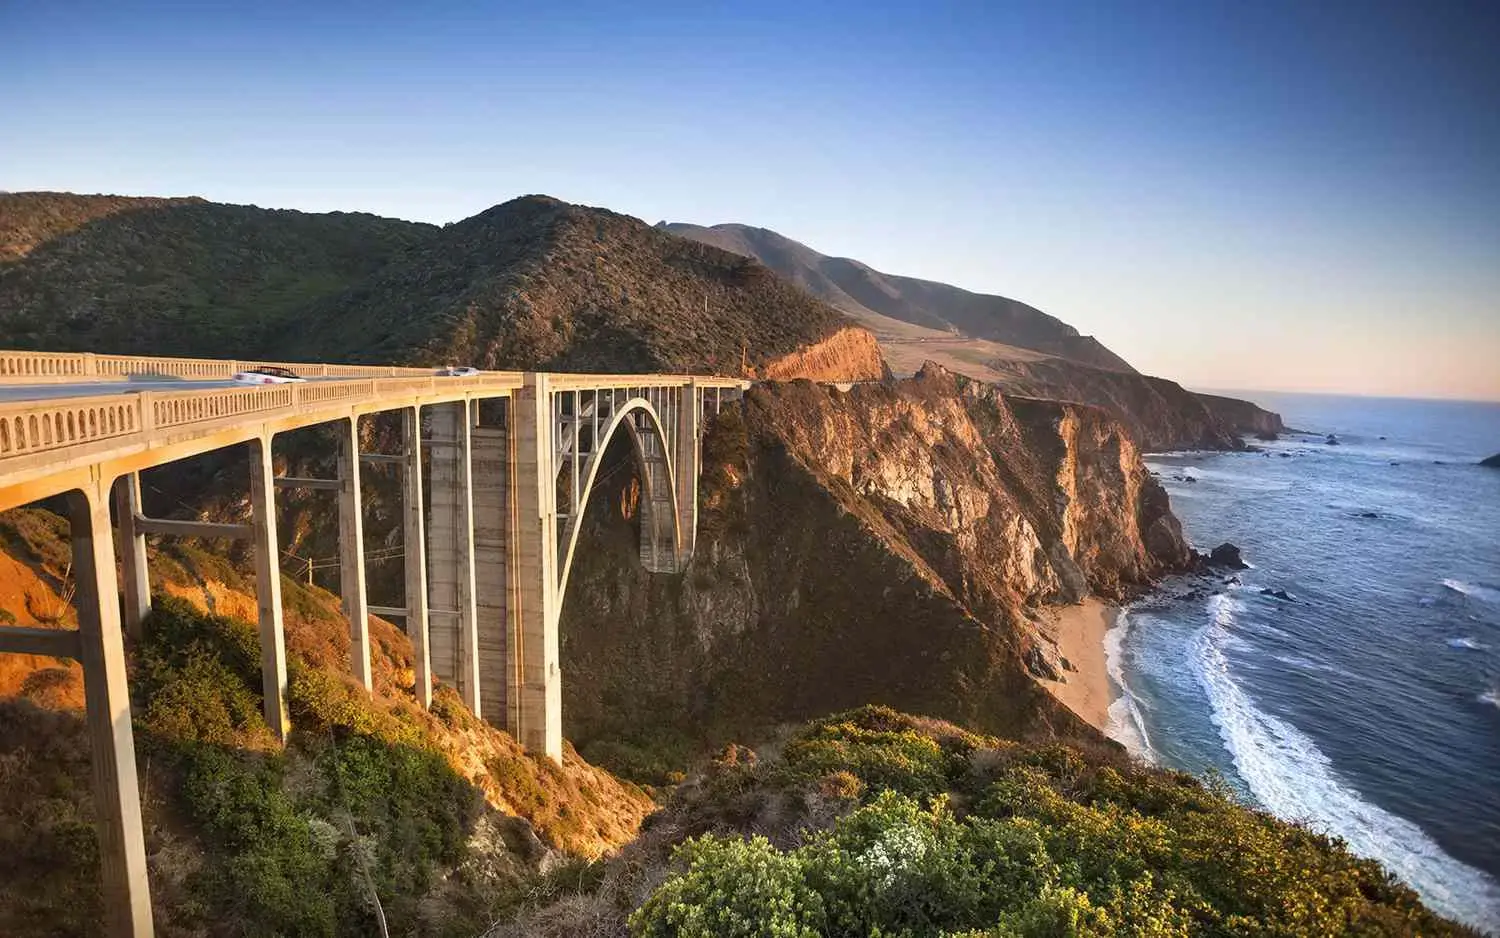 The pacific coast highway